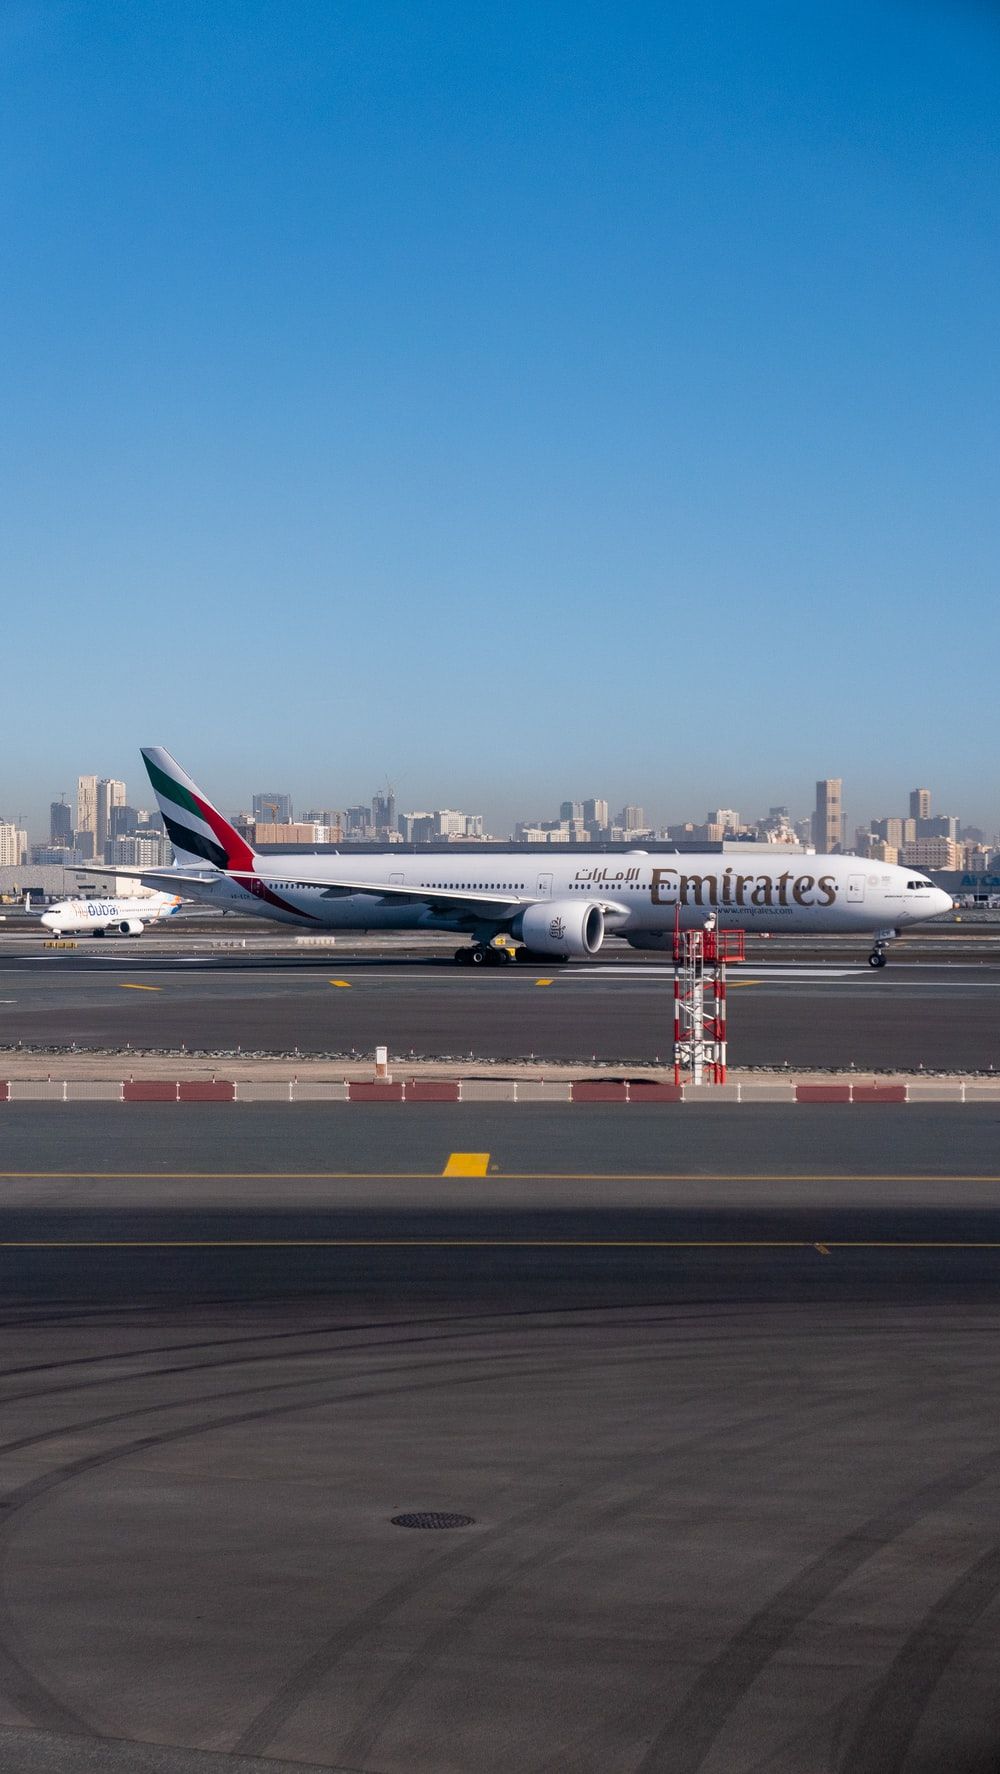 Emirates Picture. Download Free Image